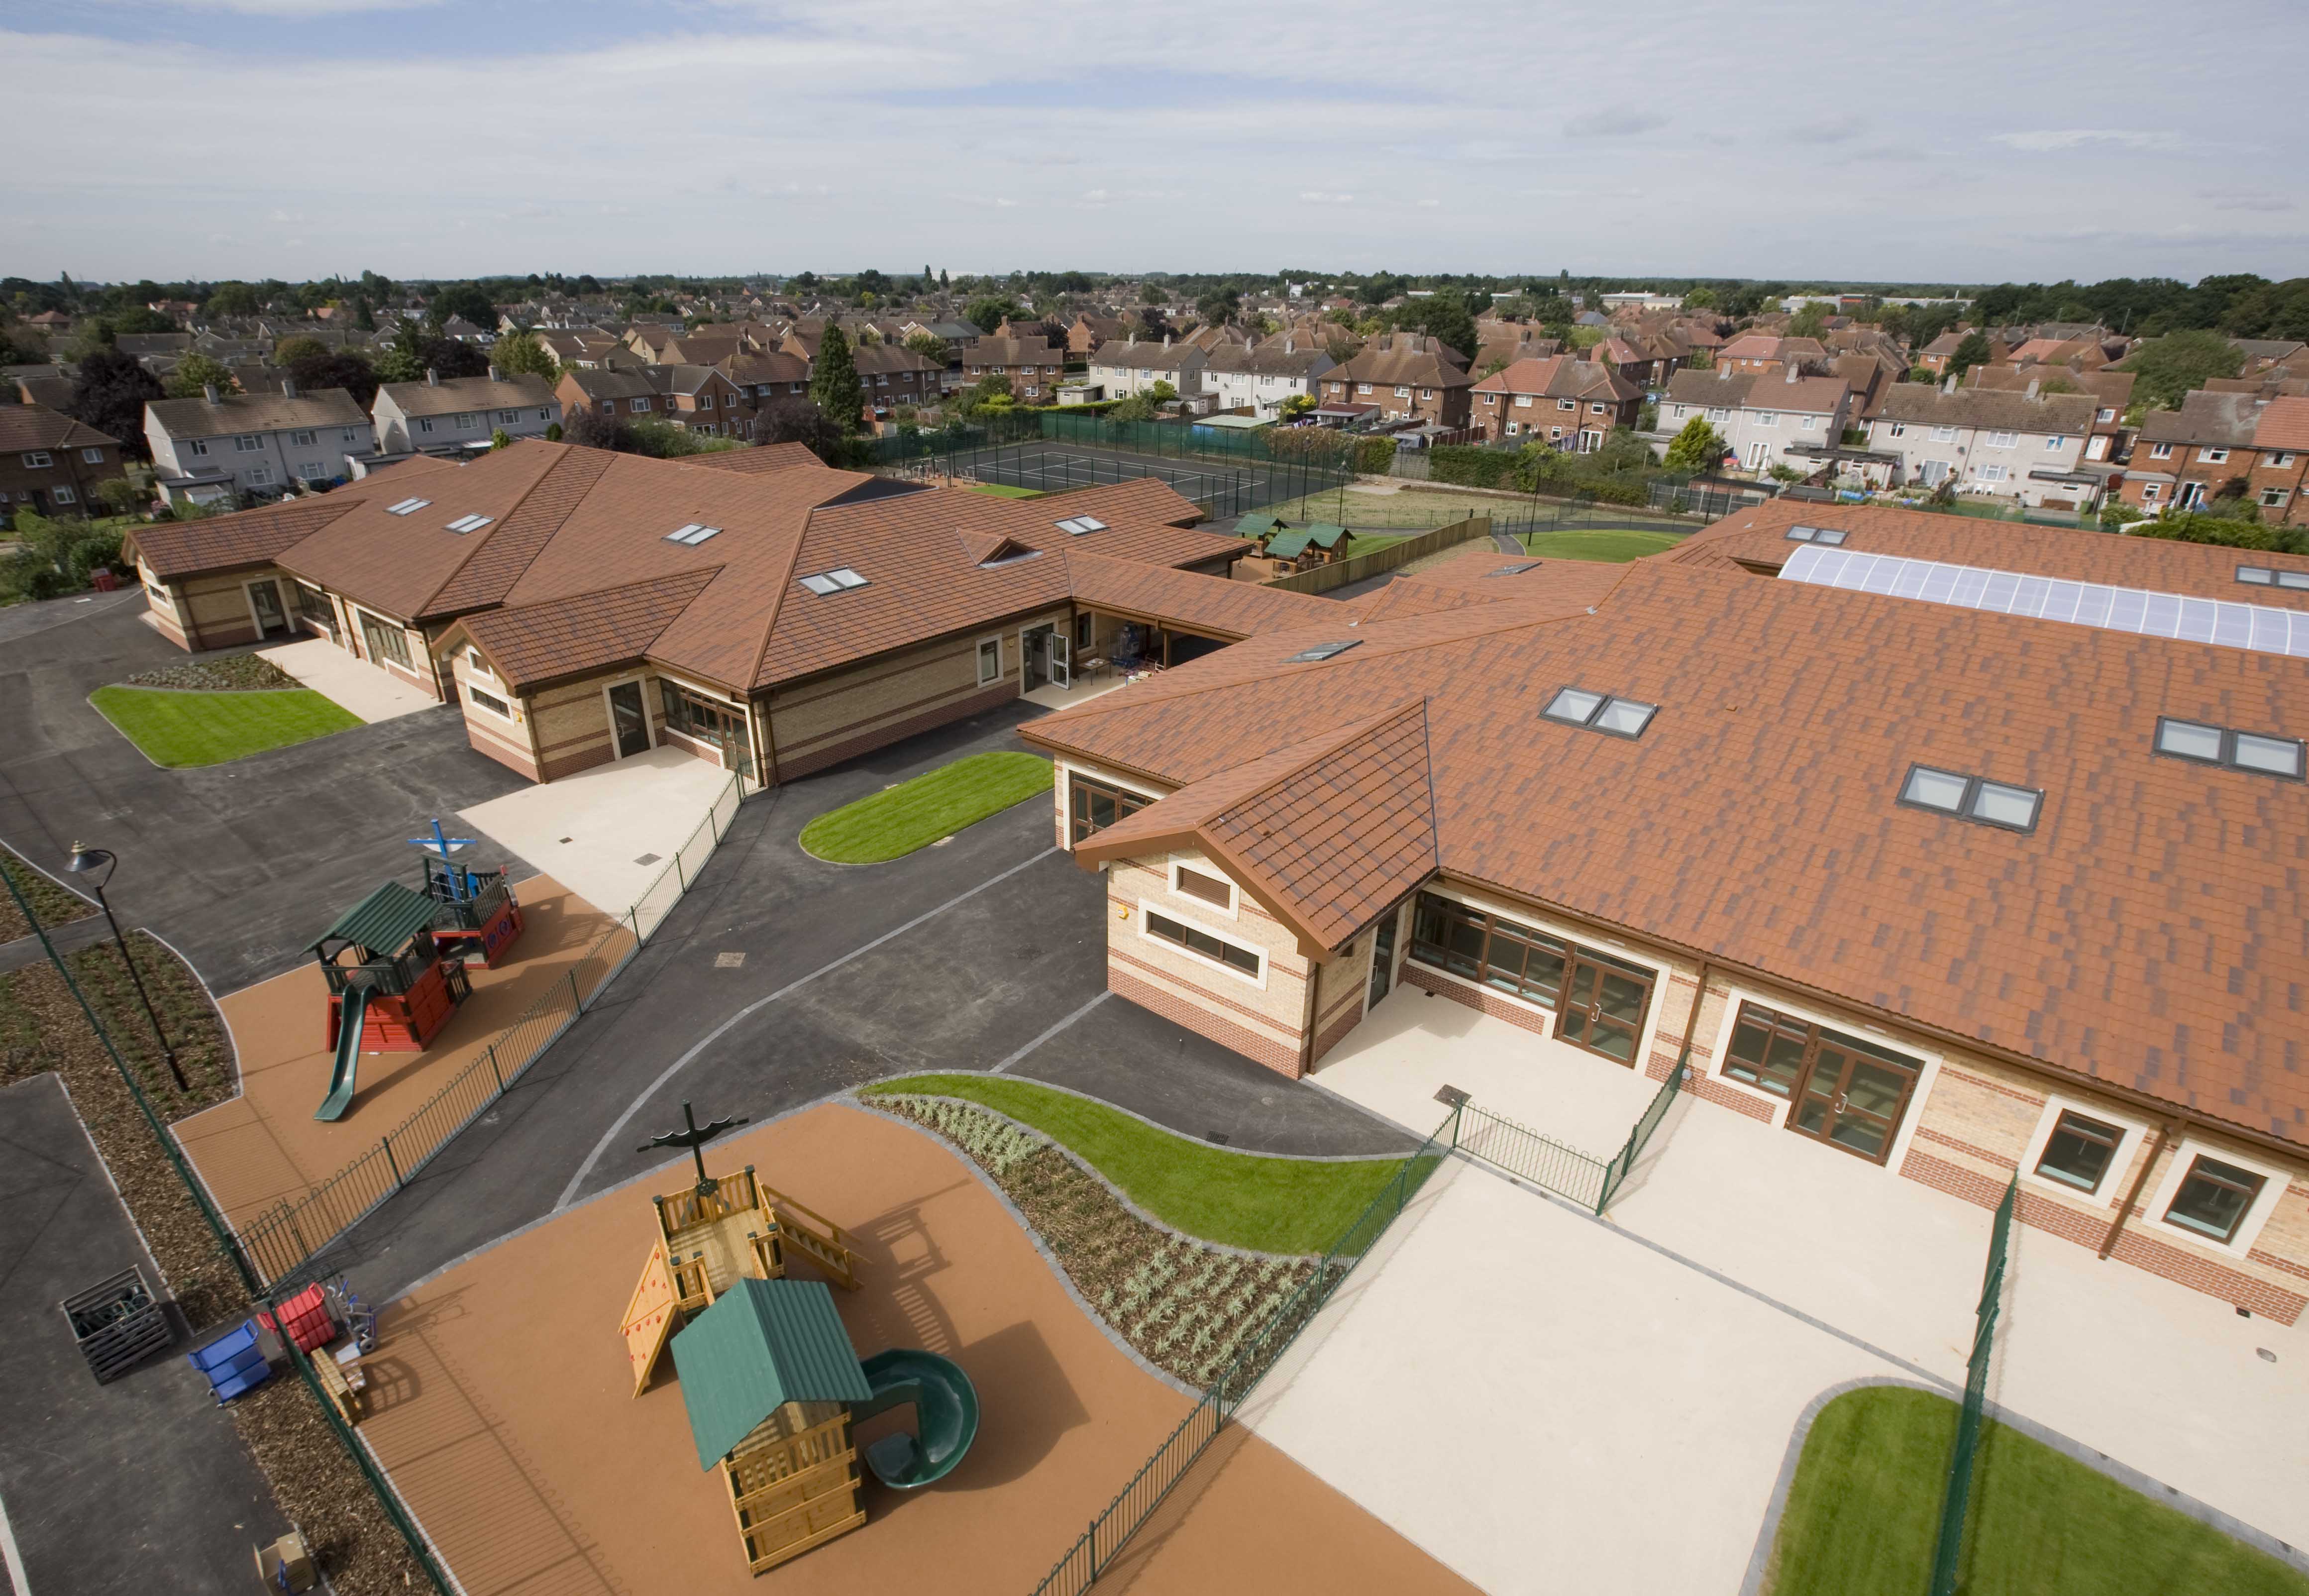 Priory Lincoln Academies Refurbishment and New Build with Metrotile Lightweight Roofing Bond in Brindle